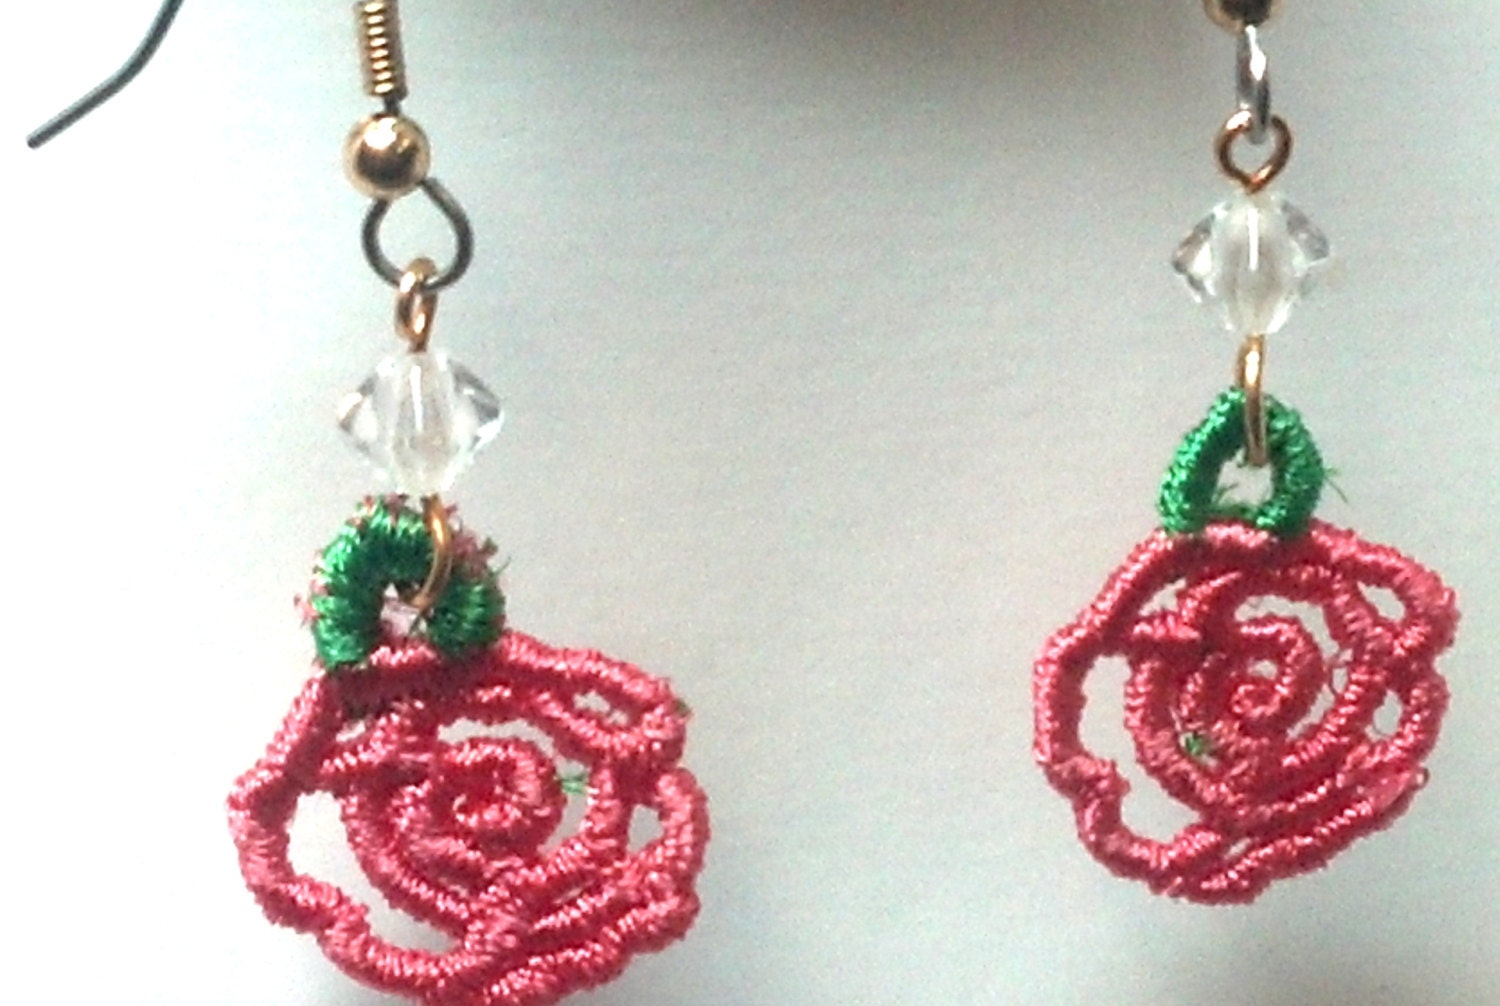 Pink Rose Earrings, flowers, flower earrings, earrings, jewelry for her, jewelry, handcrafted, handmade, online, Etsy, Embroidery, forever, forever gifts, love, valentines day, great gifts, anniversary, 